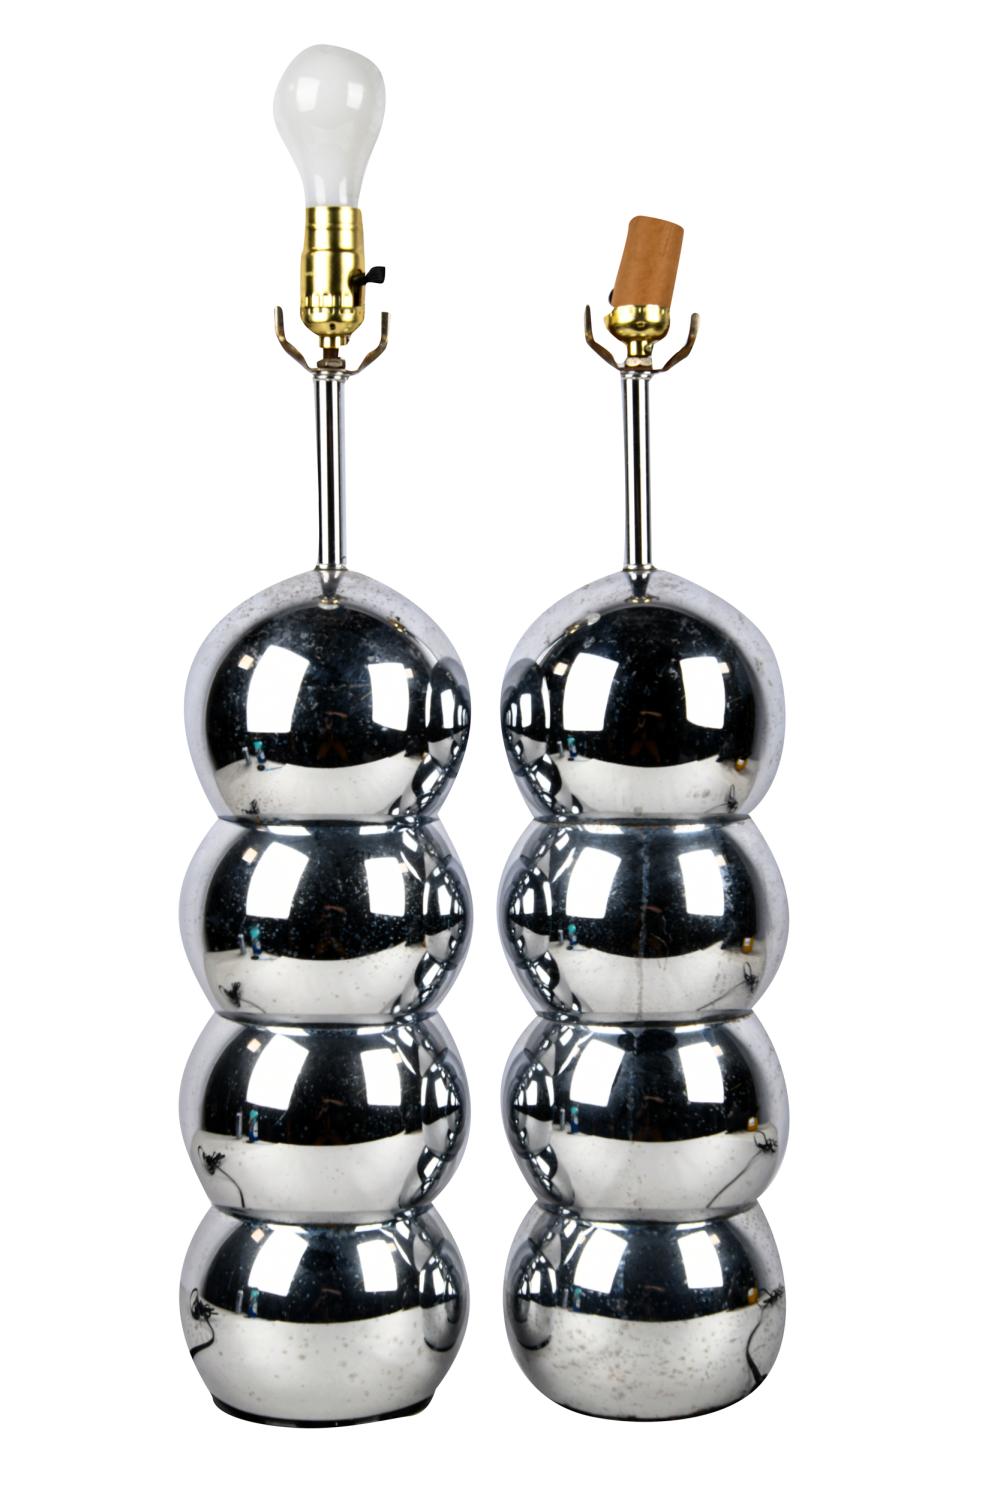 PAIR OF CHROME MODERN TABLE LAMPSCondition: